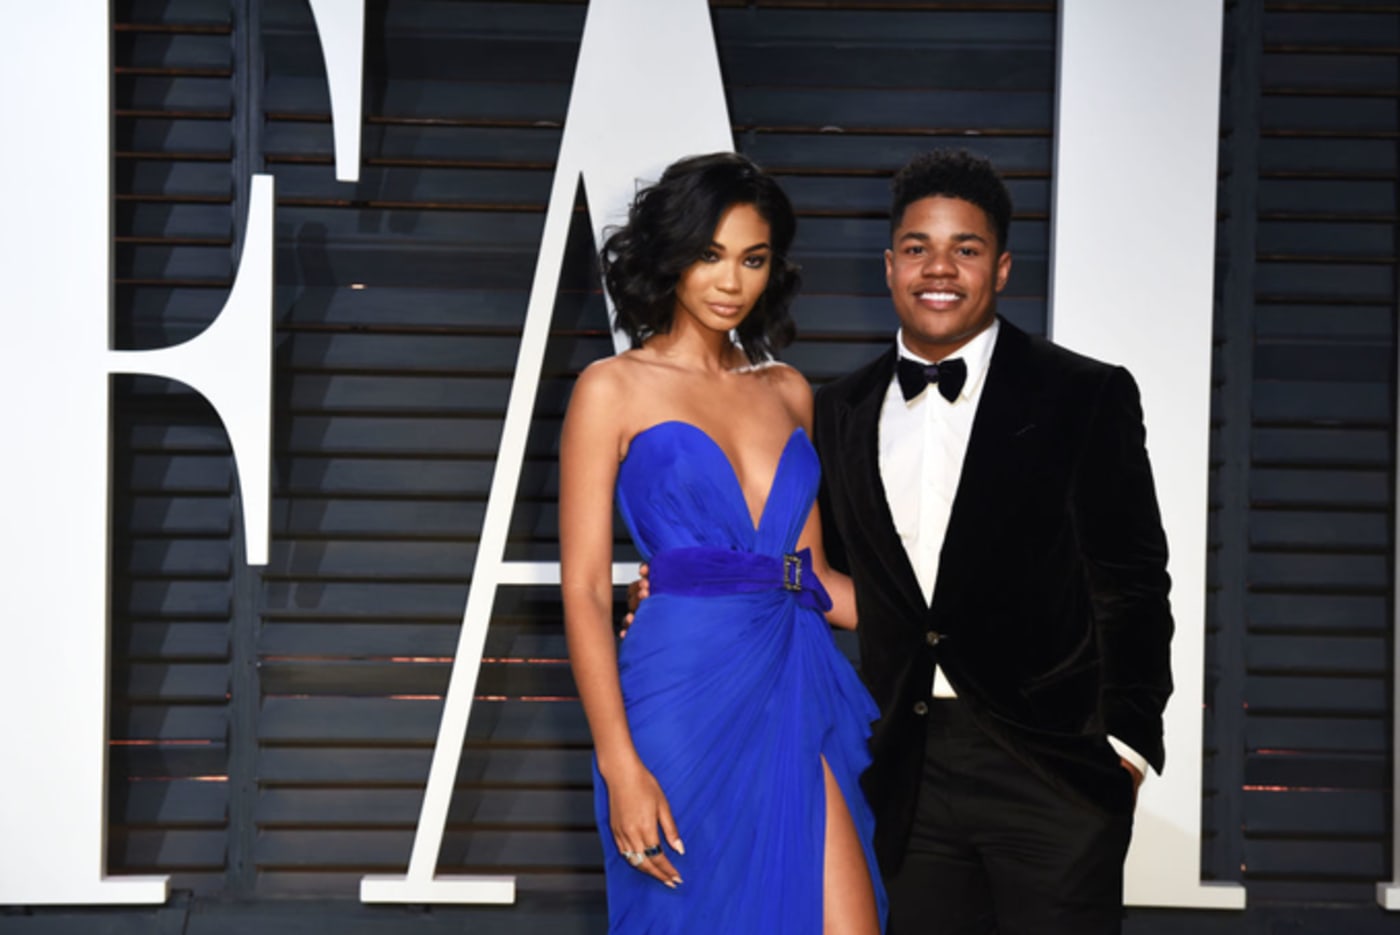 Chanel Iman and Sterling Shepard attend the 2017 Vanity Fair Oscar Party